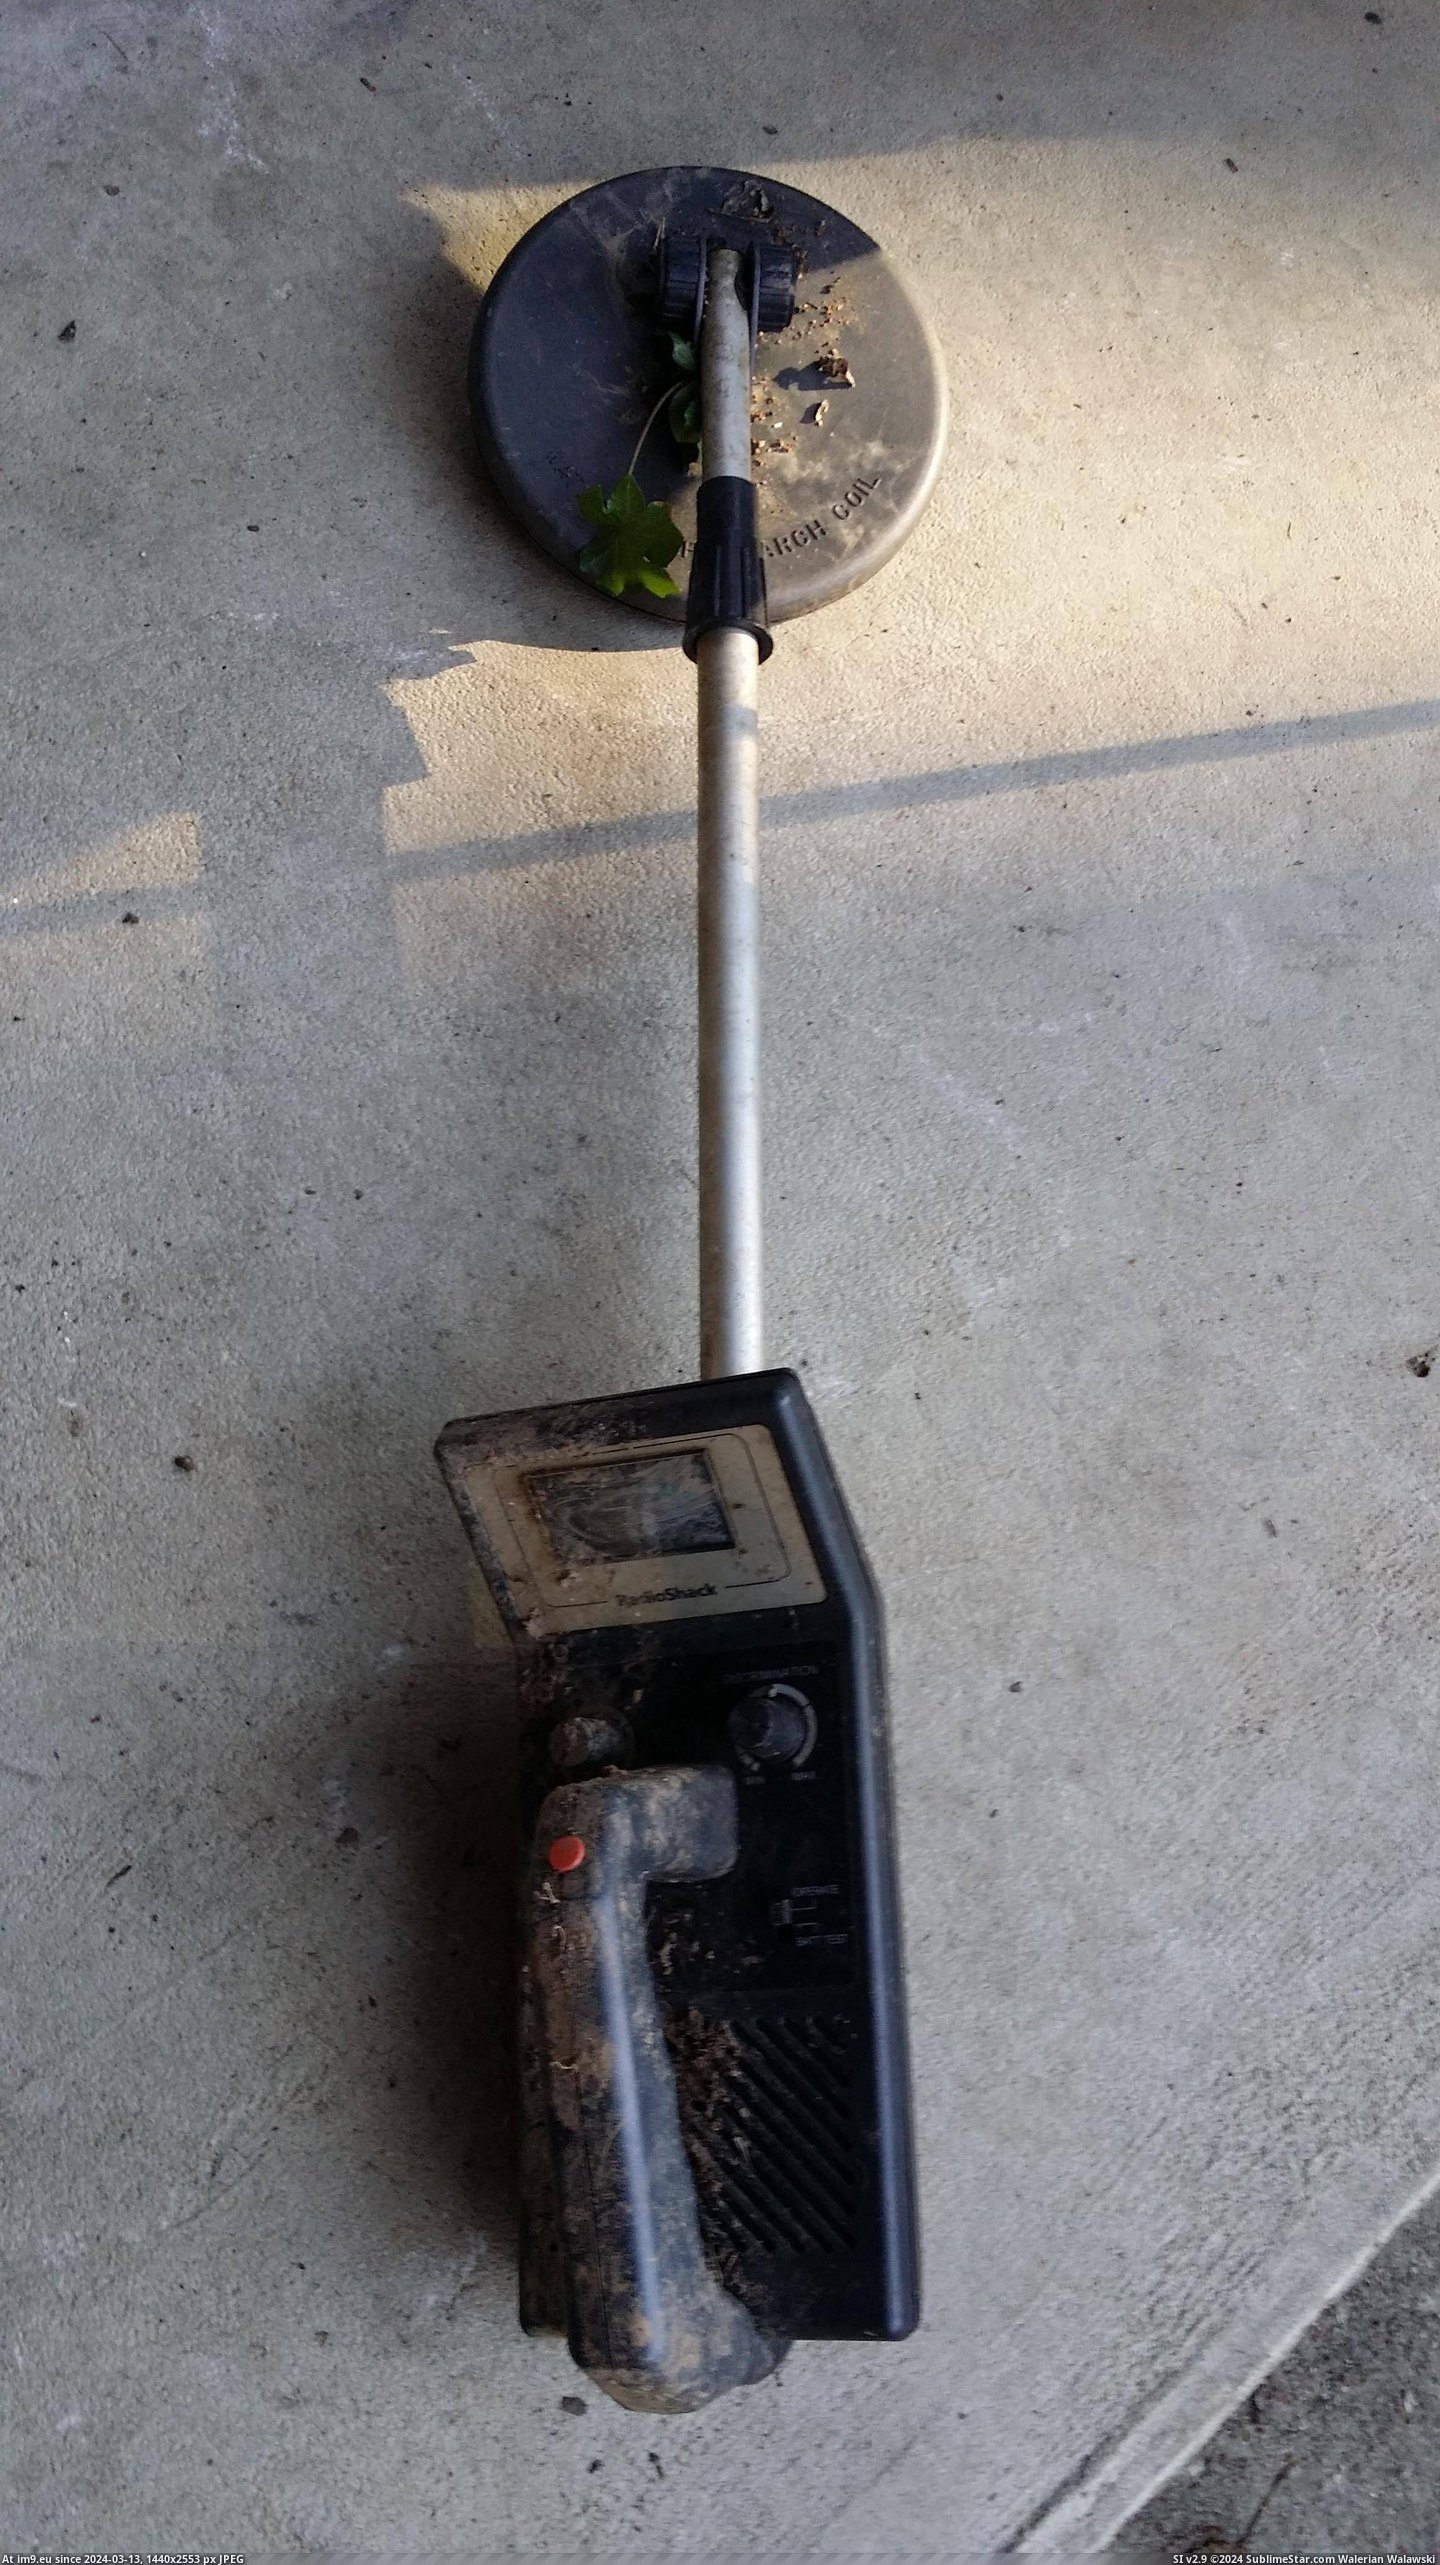 #Year #Old #Christmas #Received #Parent #Property #Son #Asked #Metal [Pics] My 11-year old son asked for & received a metal detector for Christmas. He took it out on my parent's property, and t Pic. (Image of album My r/PICS favs))